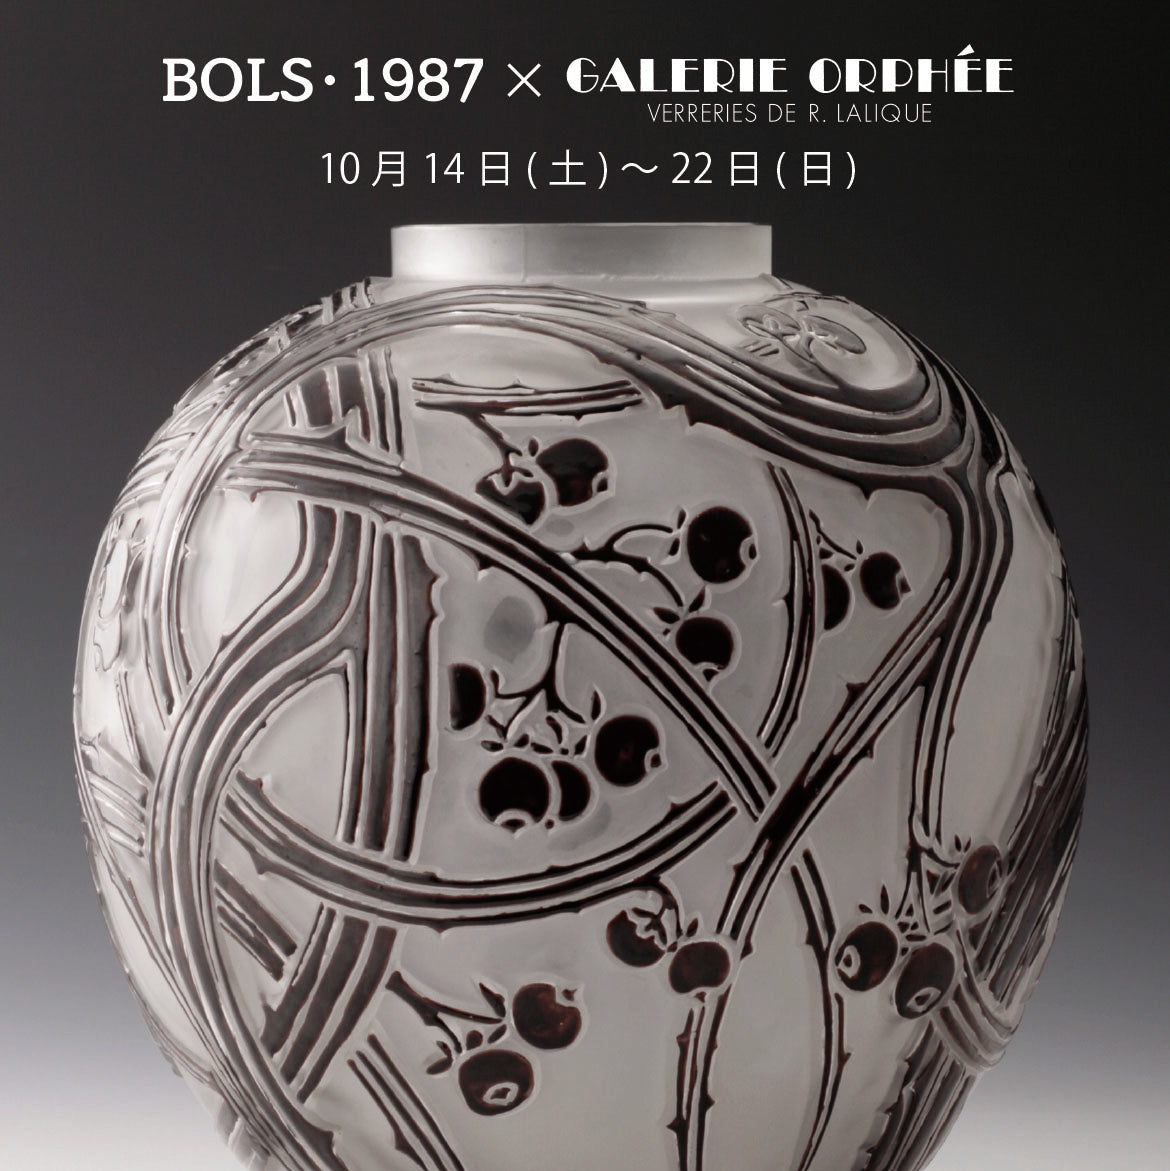 BOLS･1987 × GALERIE ORPHEE　　　　　Antique Collection